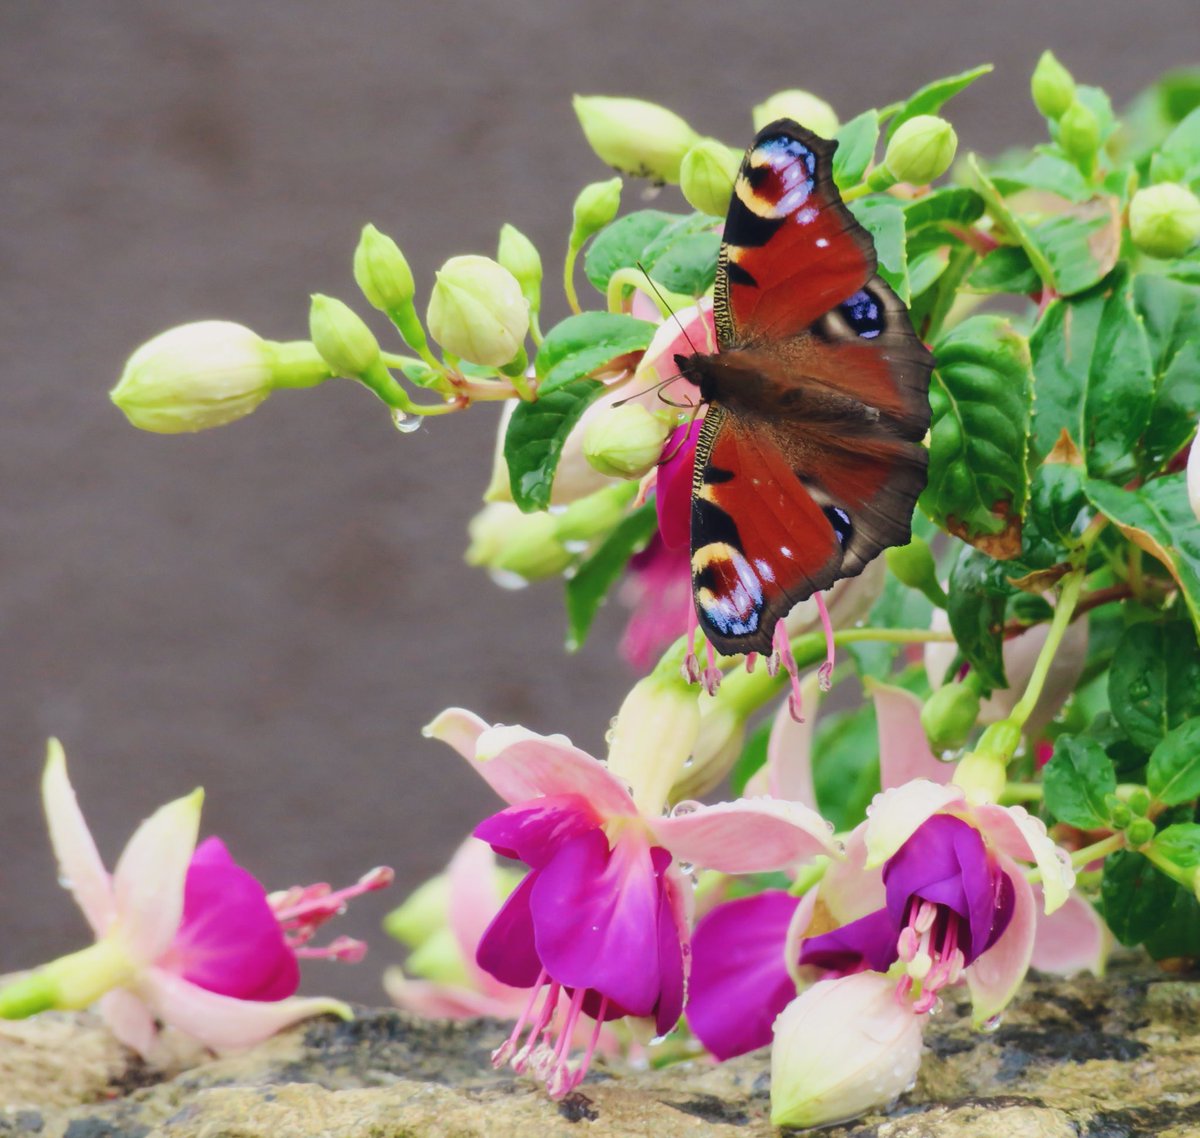 RT @lynda_lambert: A lovely Peacock butterfly floated around my garden on and off all day. https://t.co/Jr3P43zU1P